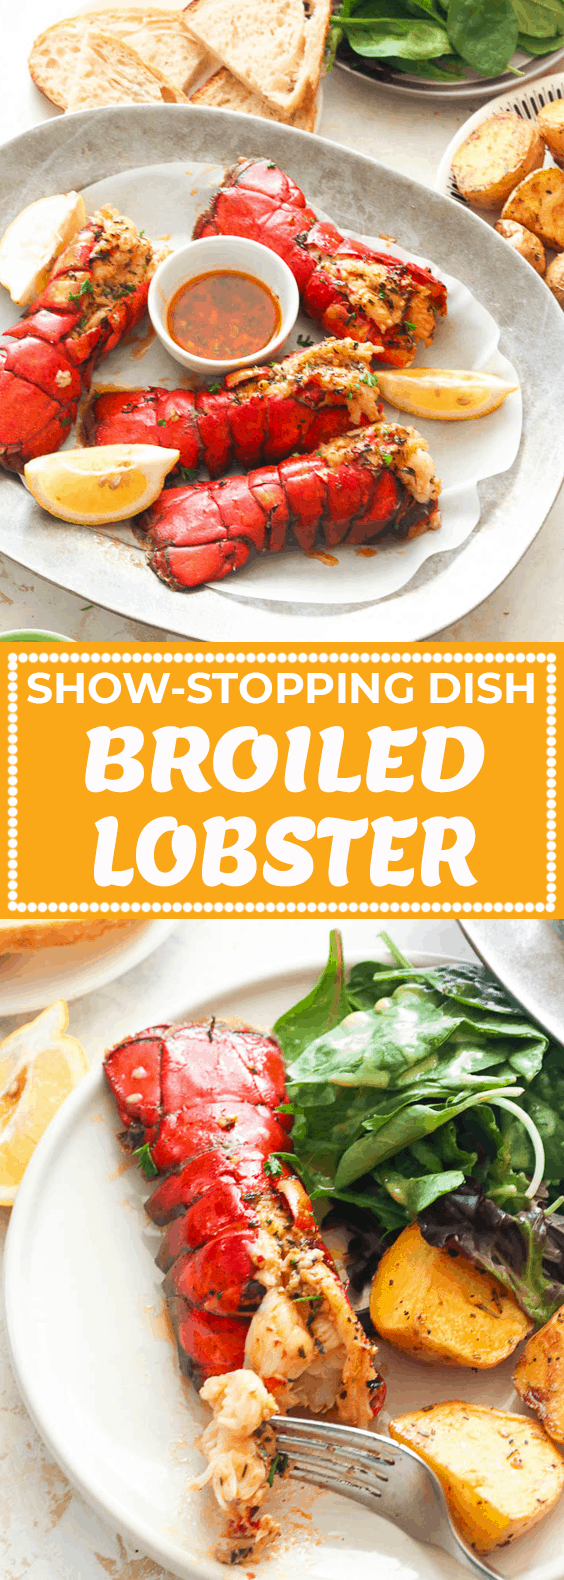 Broiled Lobster